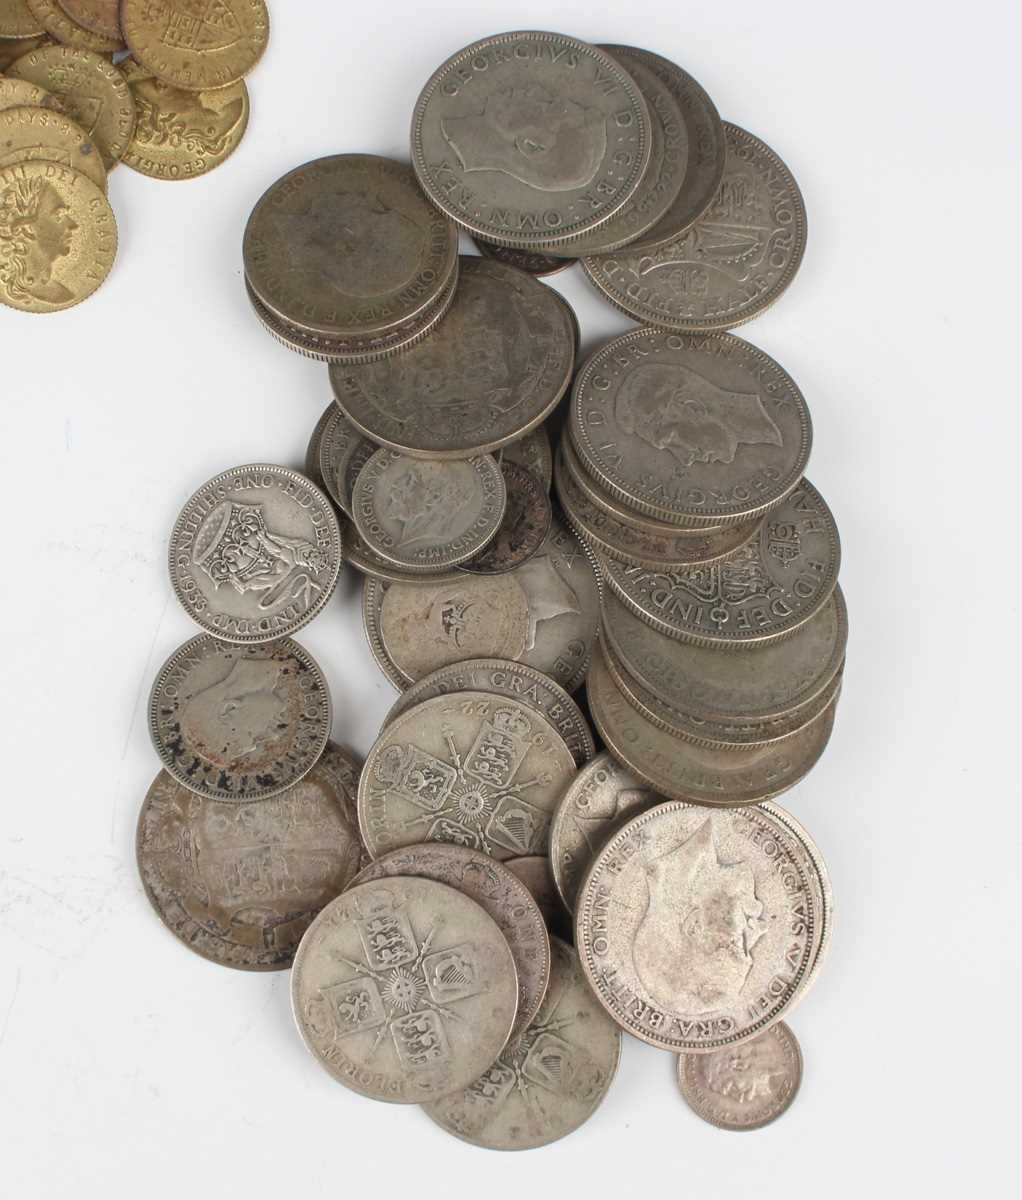 A collection of British and world coins, tokens and other paranumismatic items, including a group of - Image 8 of 8